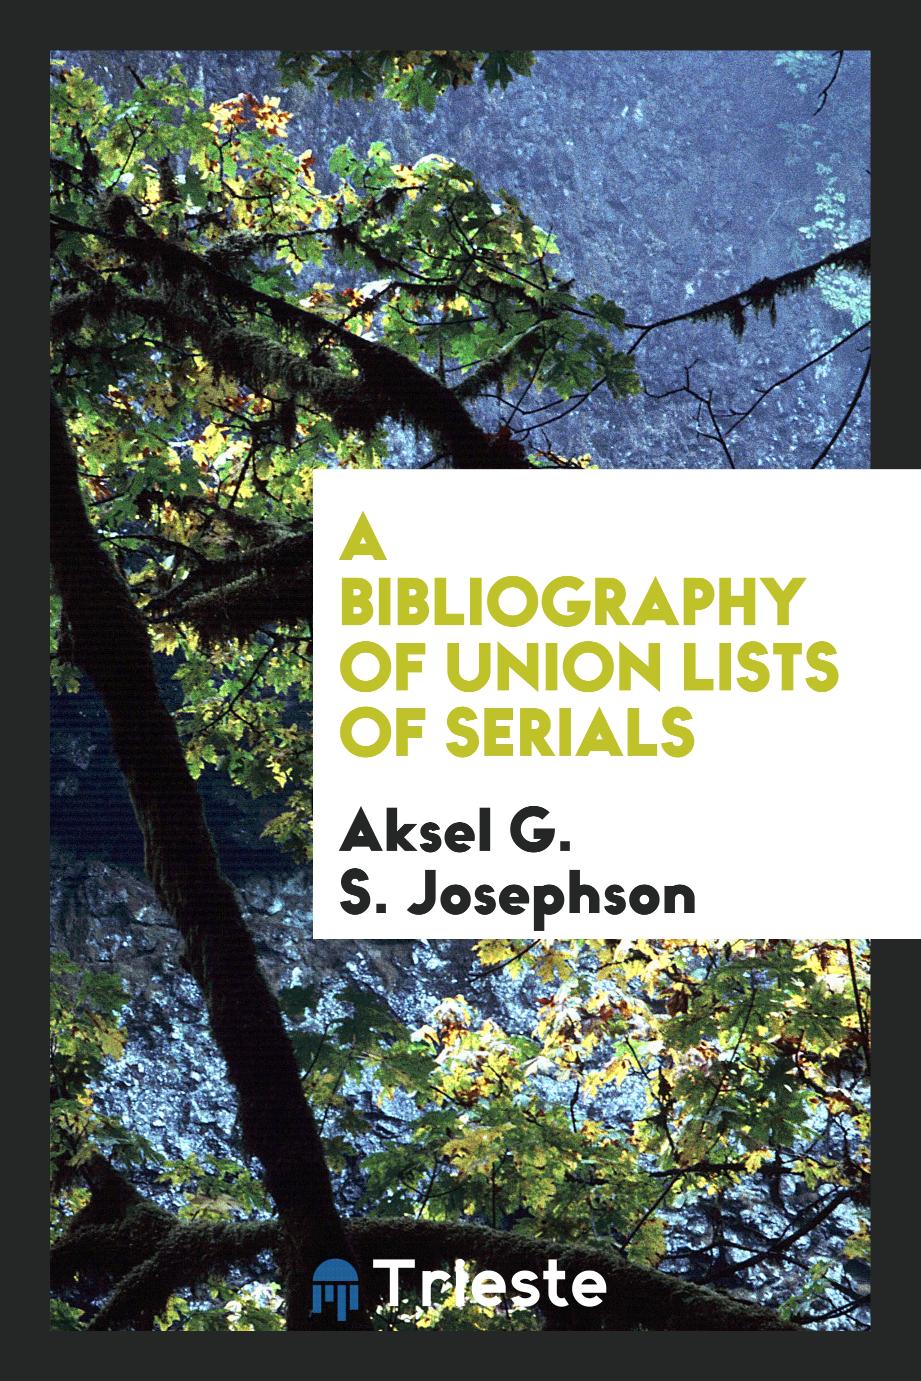 A Bibliography of Union Lists of Serials